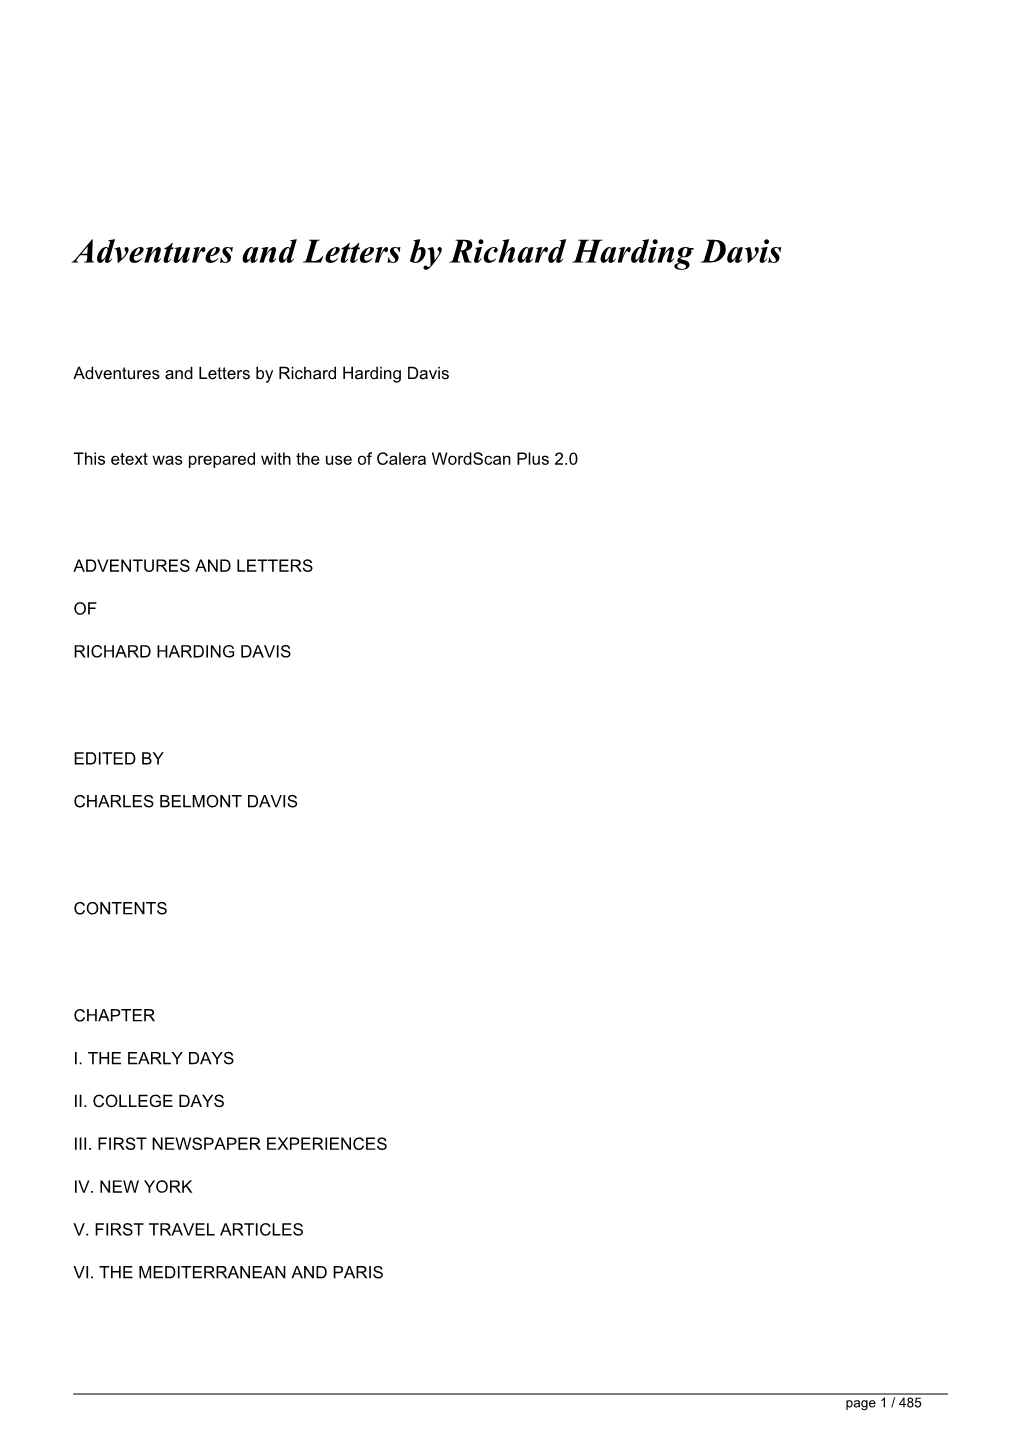 Adventures and Letters by Richard Harding Davis